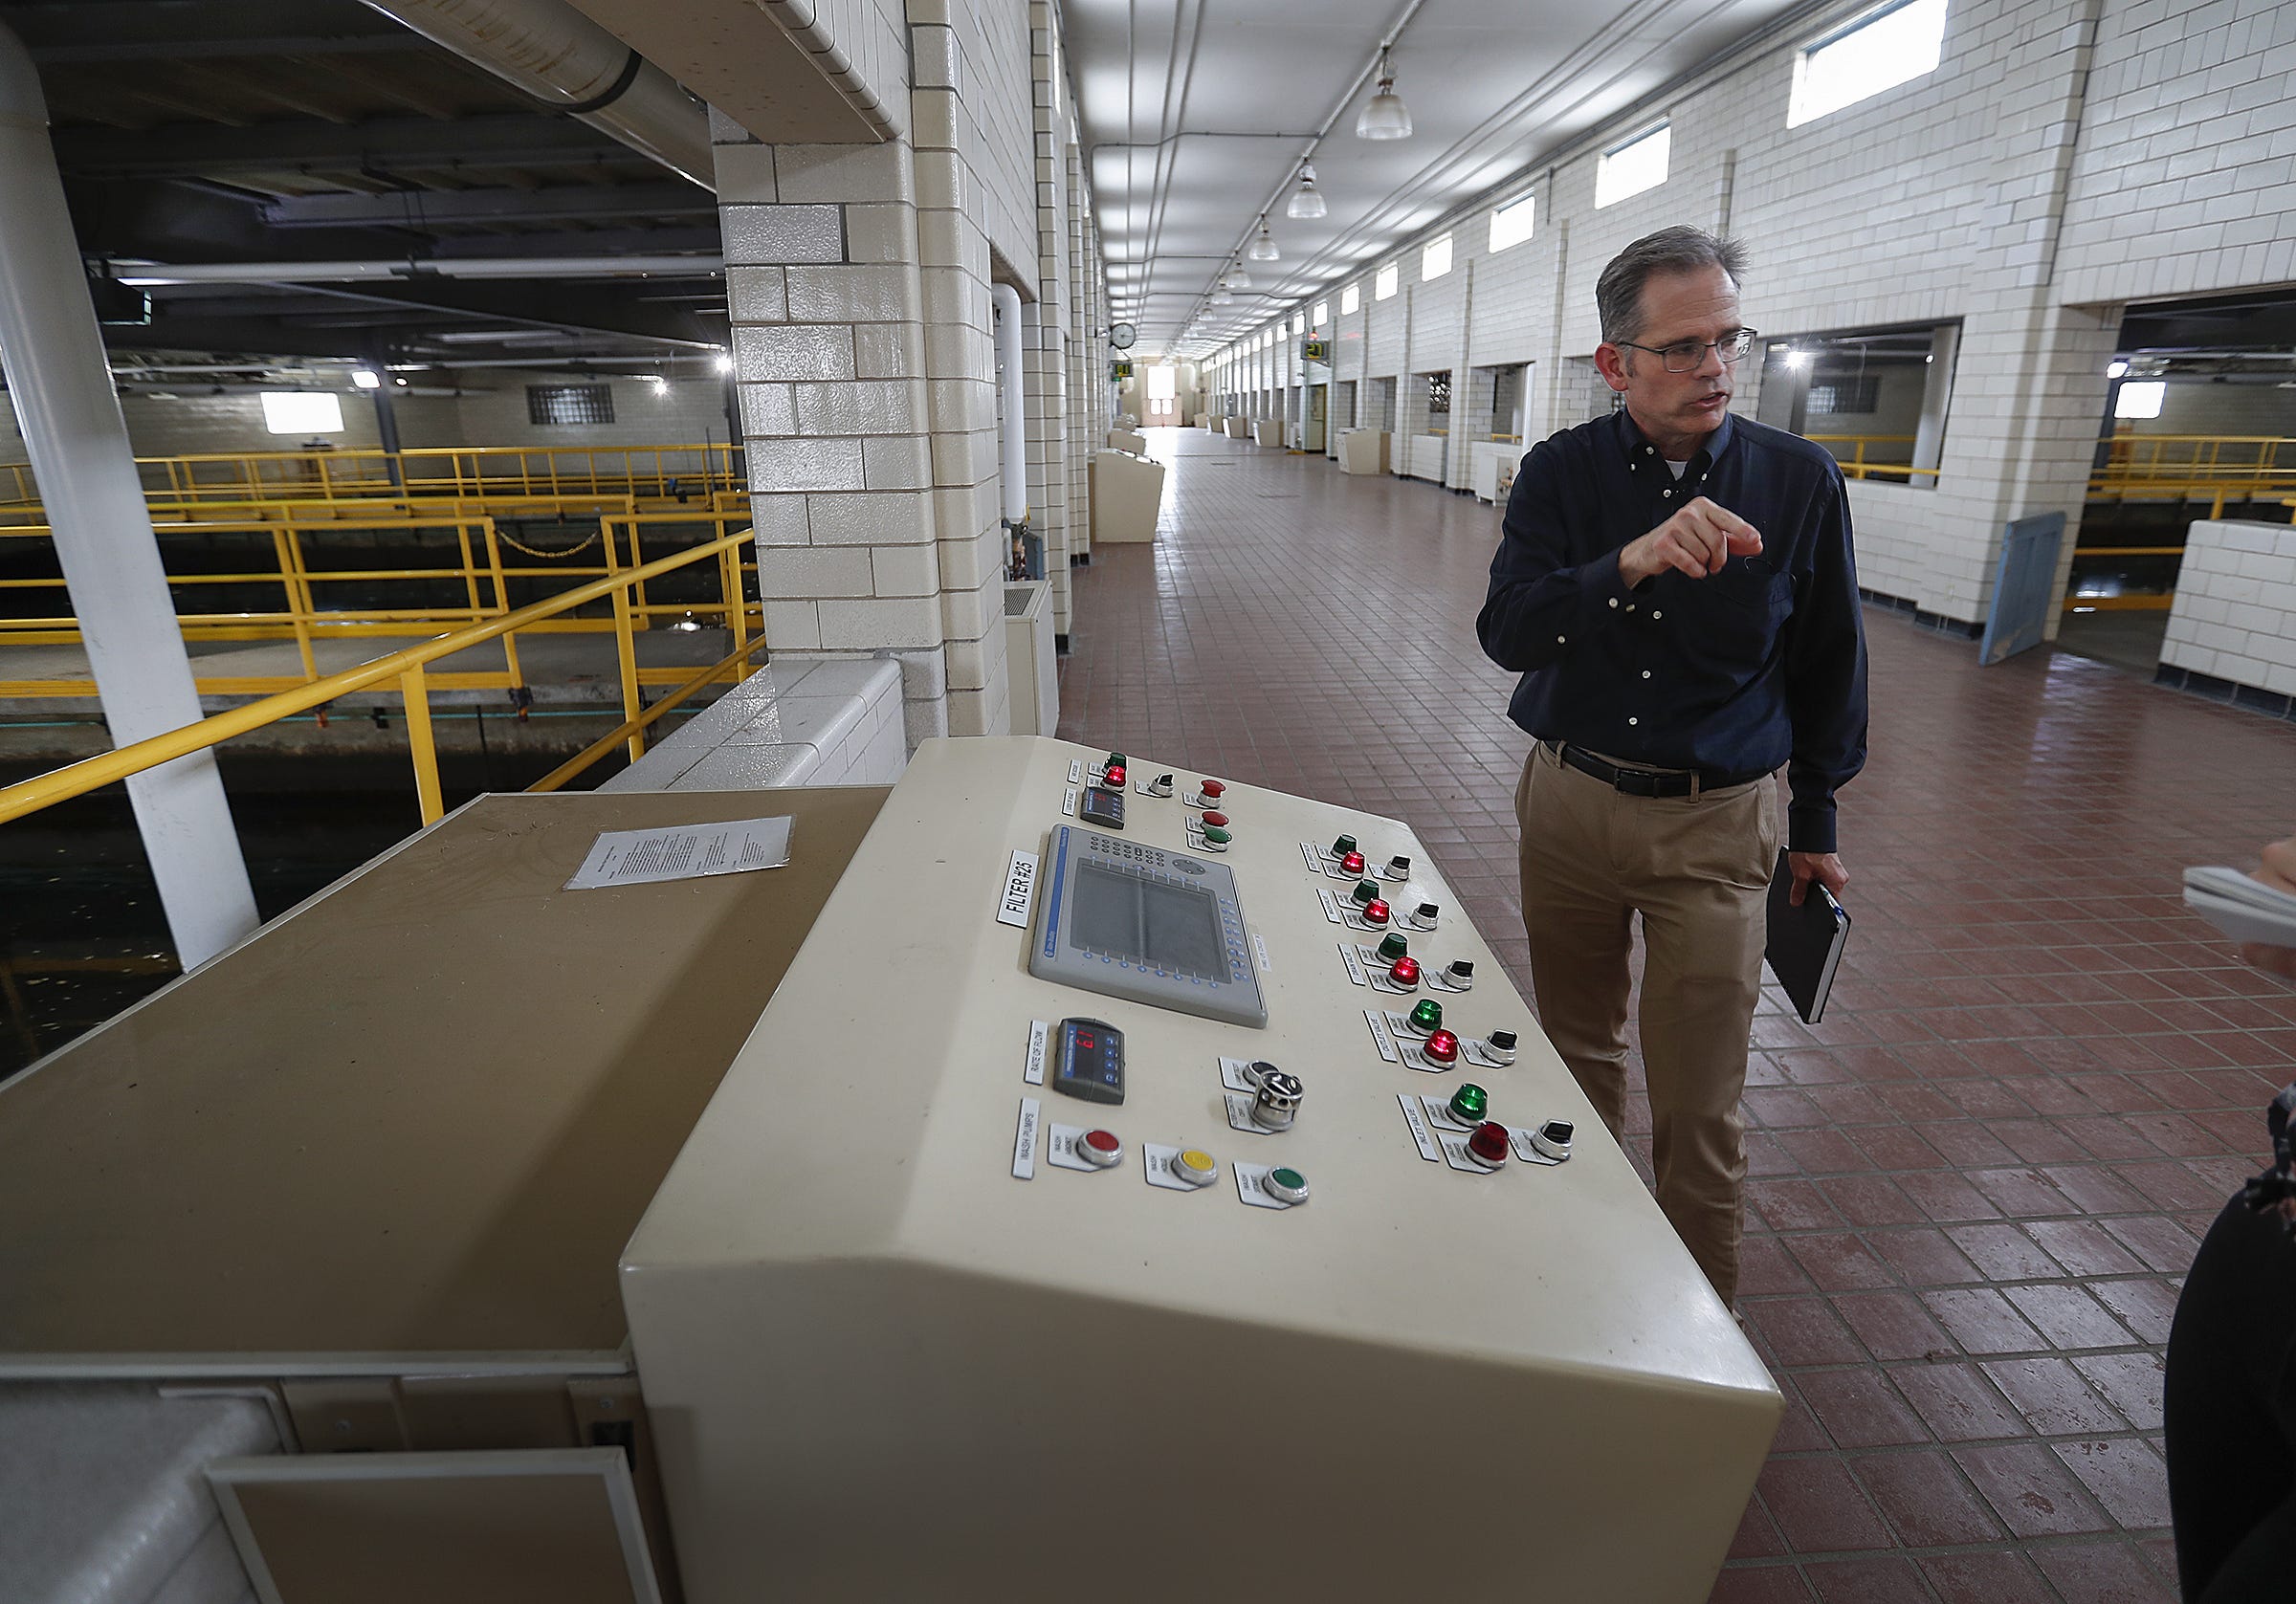 Dan Moran, director of water quality for Citizens Energy Group, talks about the water filtration bays at the White River Treatment Plant.